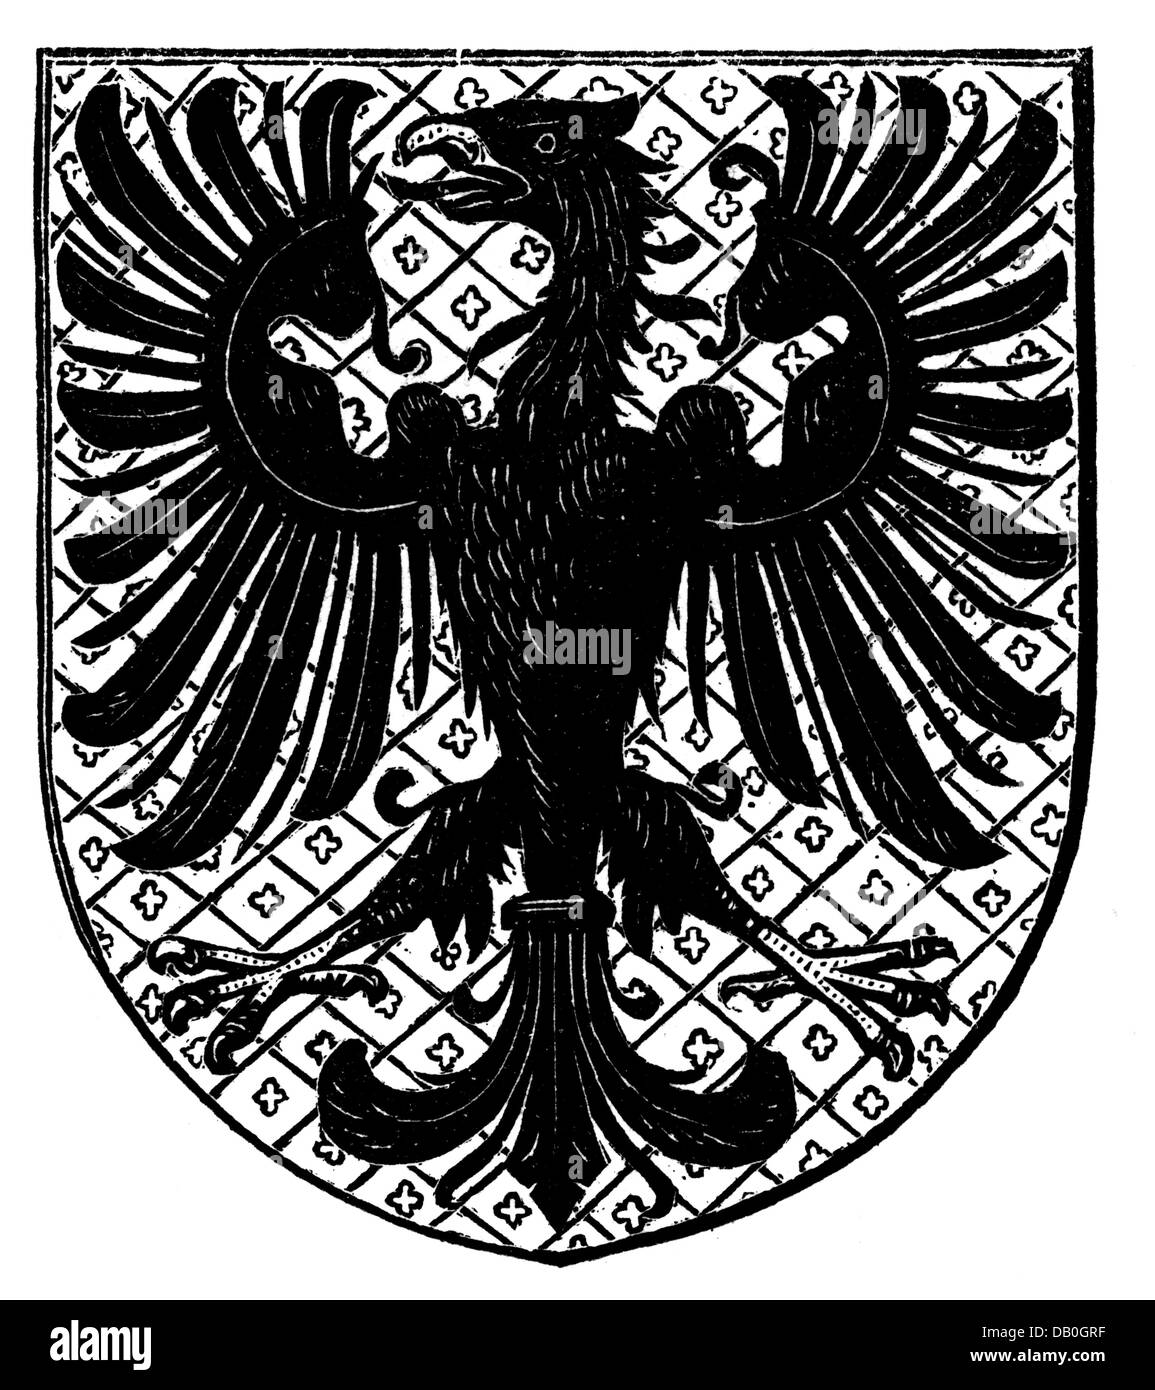 heraldry, coat of arms, Germany, city arms, Goslar, wood engraving, 1892, Additional-Rights-Clearences-Not Available Stock Photo